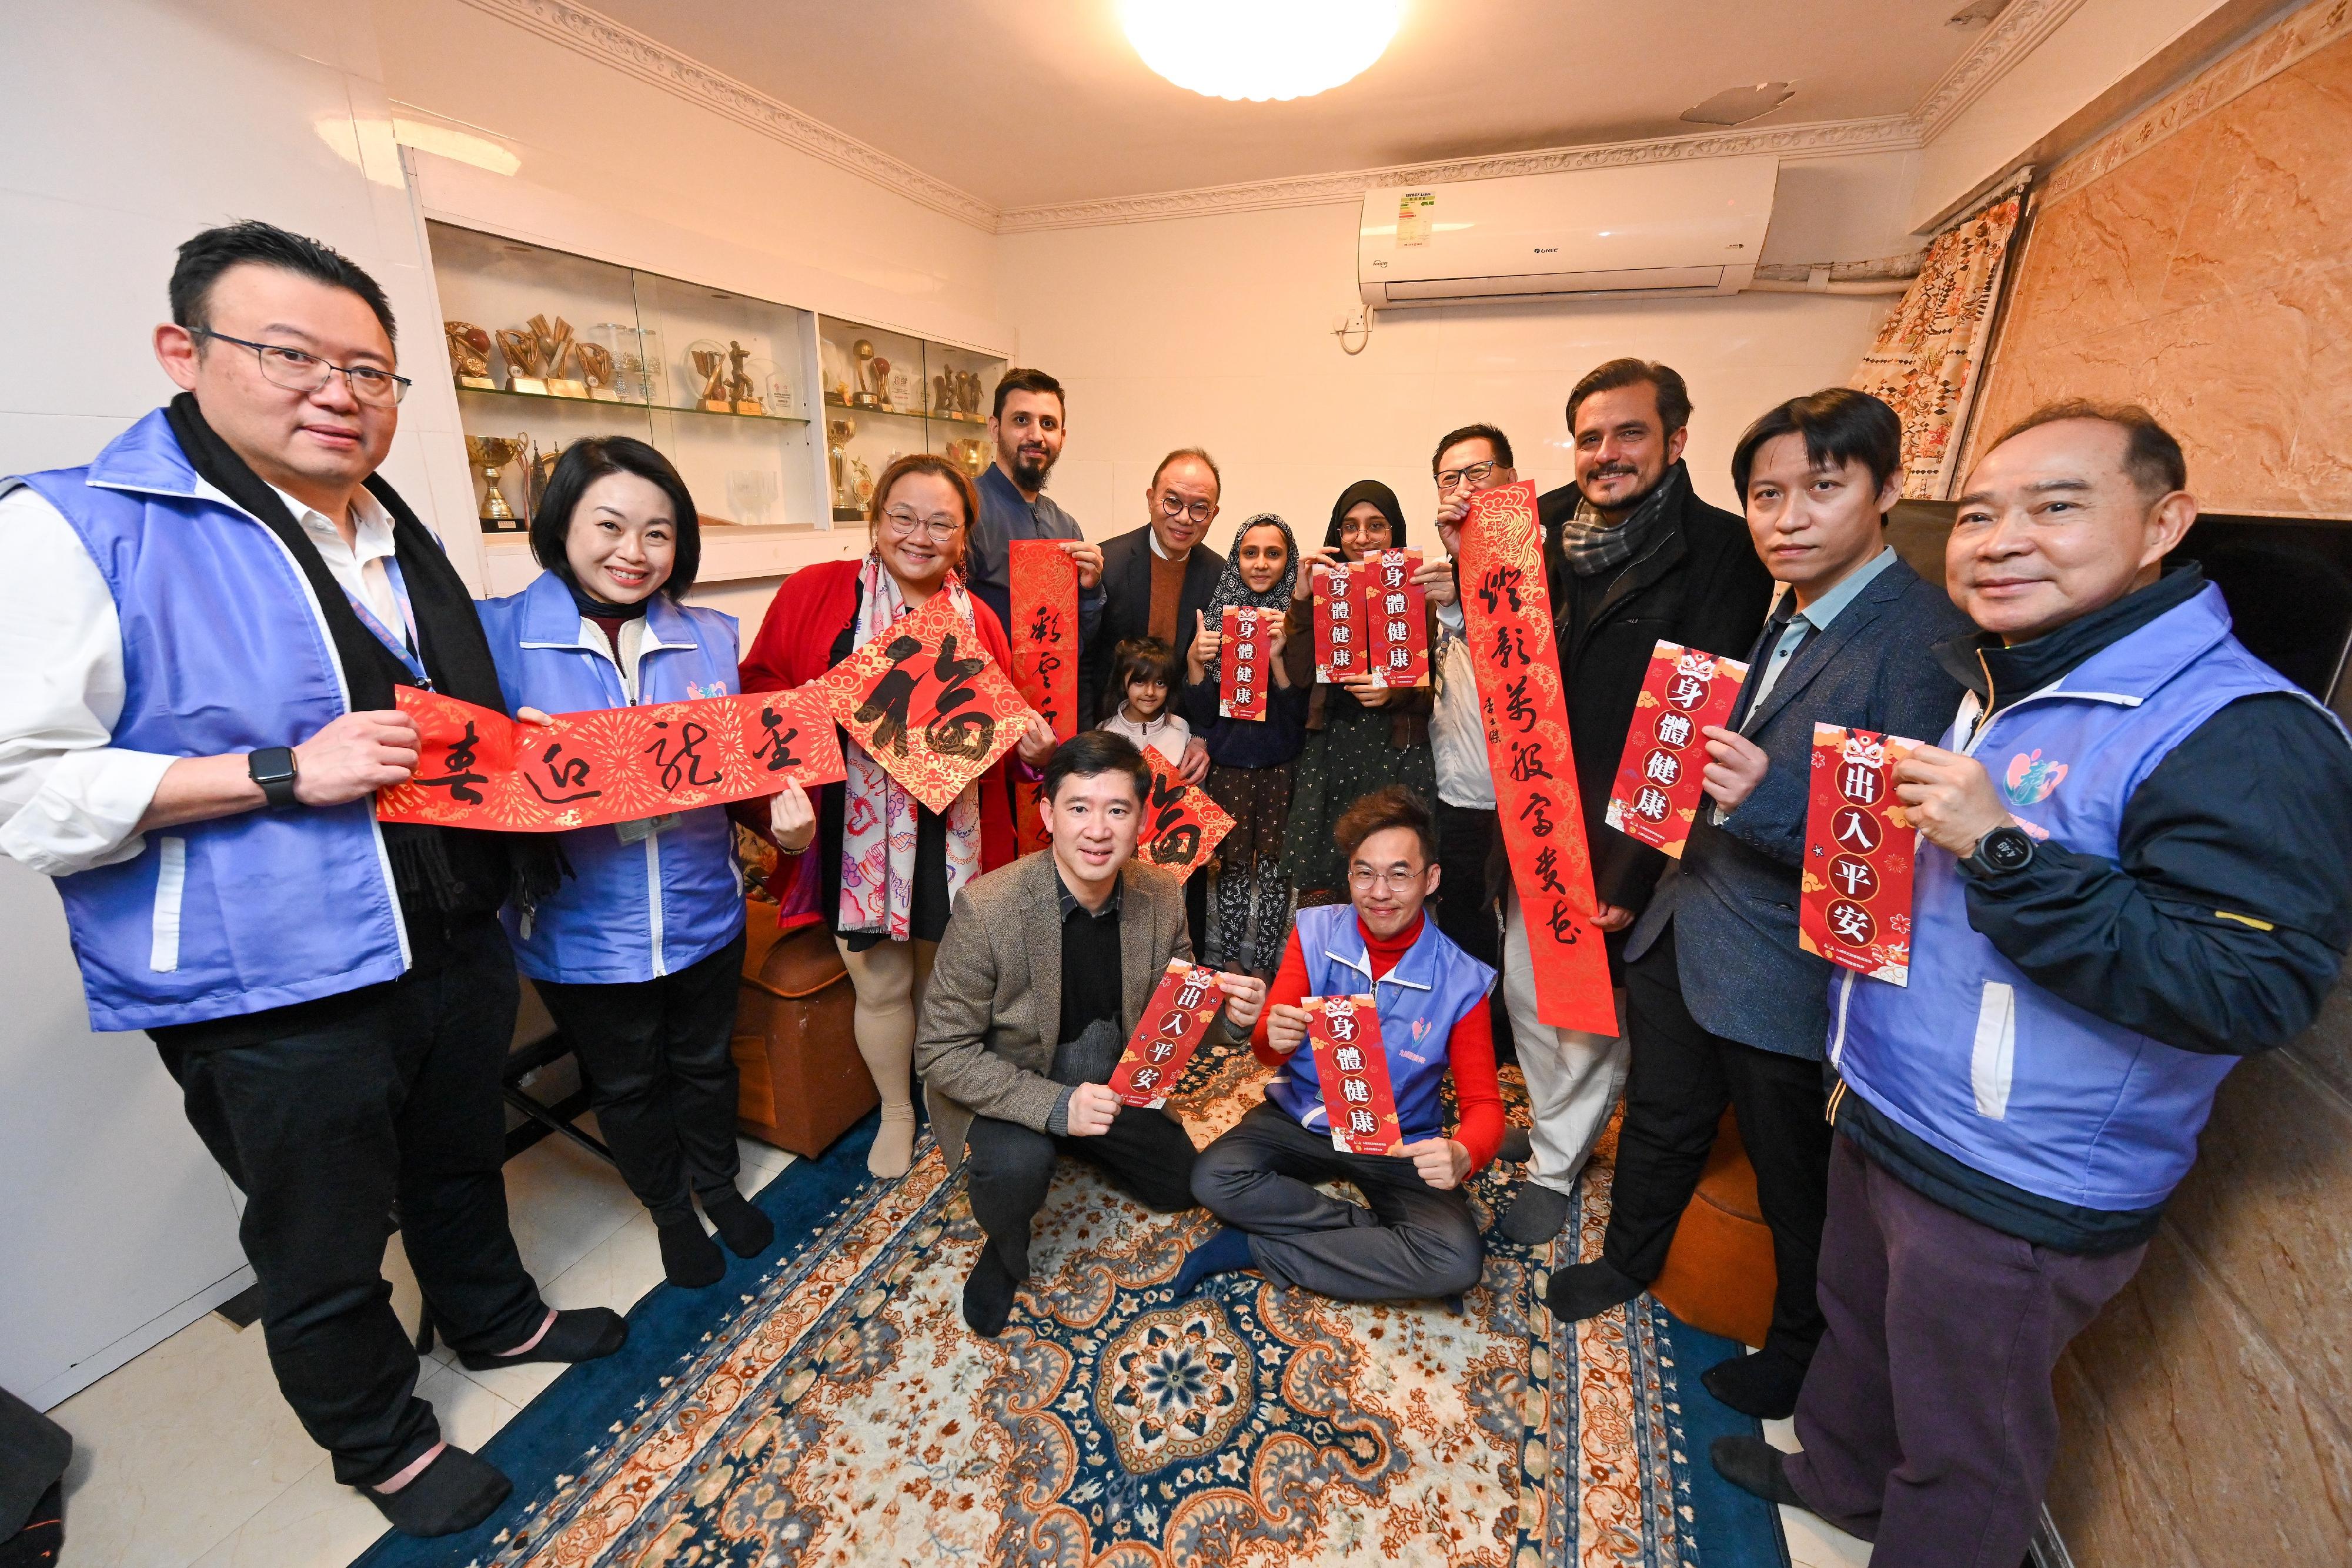 The Secretary for Constitutional and Mainland Affairs, Mr Erick Tsang Kwok-wai, and the Under Secretary Mr Clement Woo today (February 9) visited ethnic-minority families living in Kowloon City to learn about their daily lives and needs in Hong Kong and presented them with blessing bags on behalf of the Government to demonstrate care, and share with them the festive joy. Photo shows Mr Tsang (back row, fifth left) and Mr Woo (front row, first left) together with the District Officer (Kowloon City), Miss Alice Choi (back row, third left), Kowloon City District Council members and representatives from the Care Team (Kowloon City) giving New Year blessings to an ethnic-minority family.